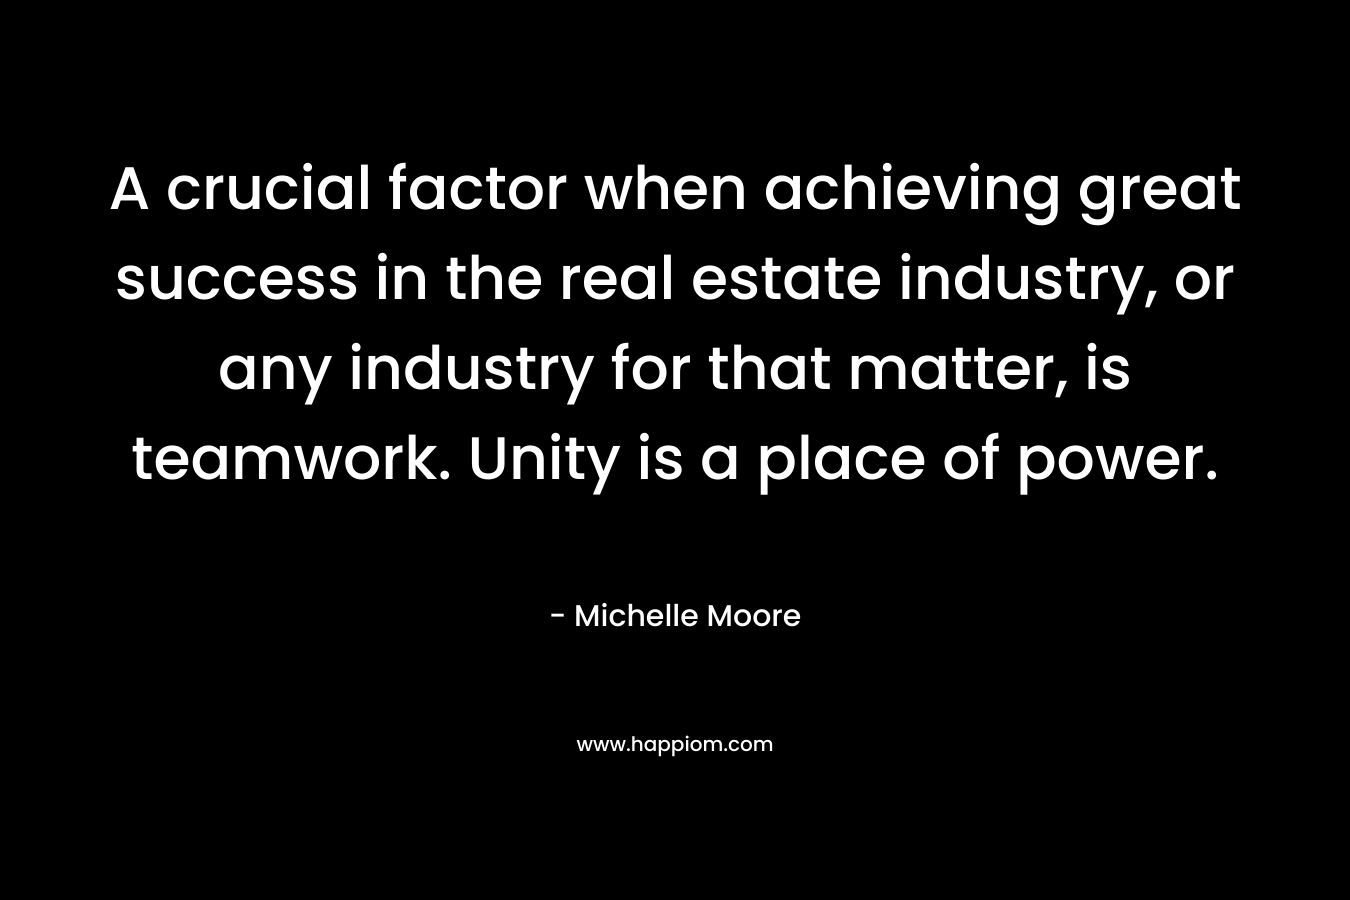 A crucial factor when achieving great success in the real estate industry, or any industry for that matter, is teamwork. Unity is a place of power. – Michelle    Moore